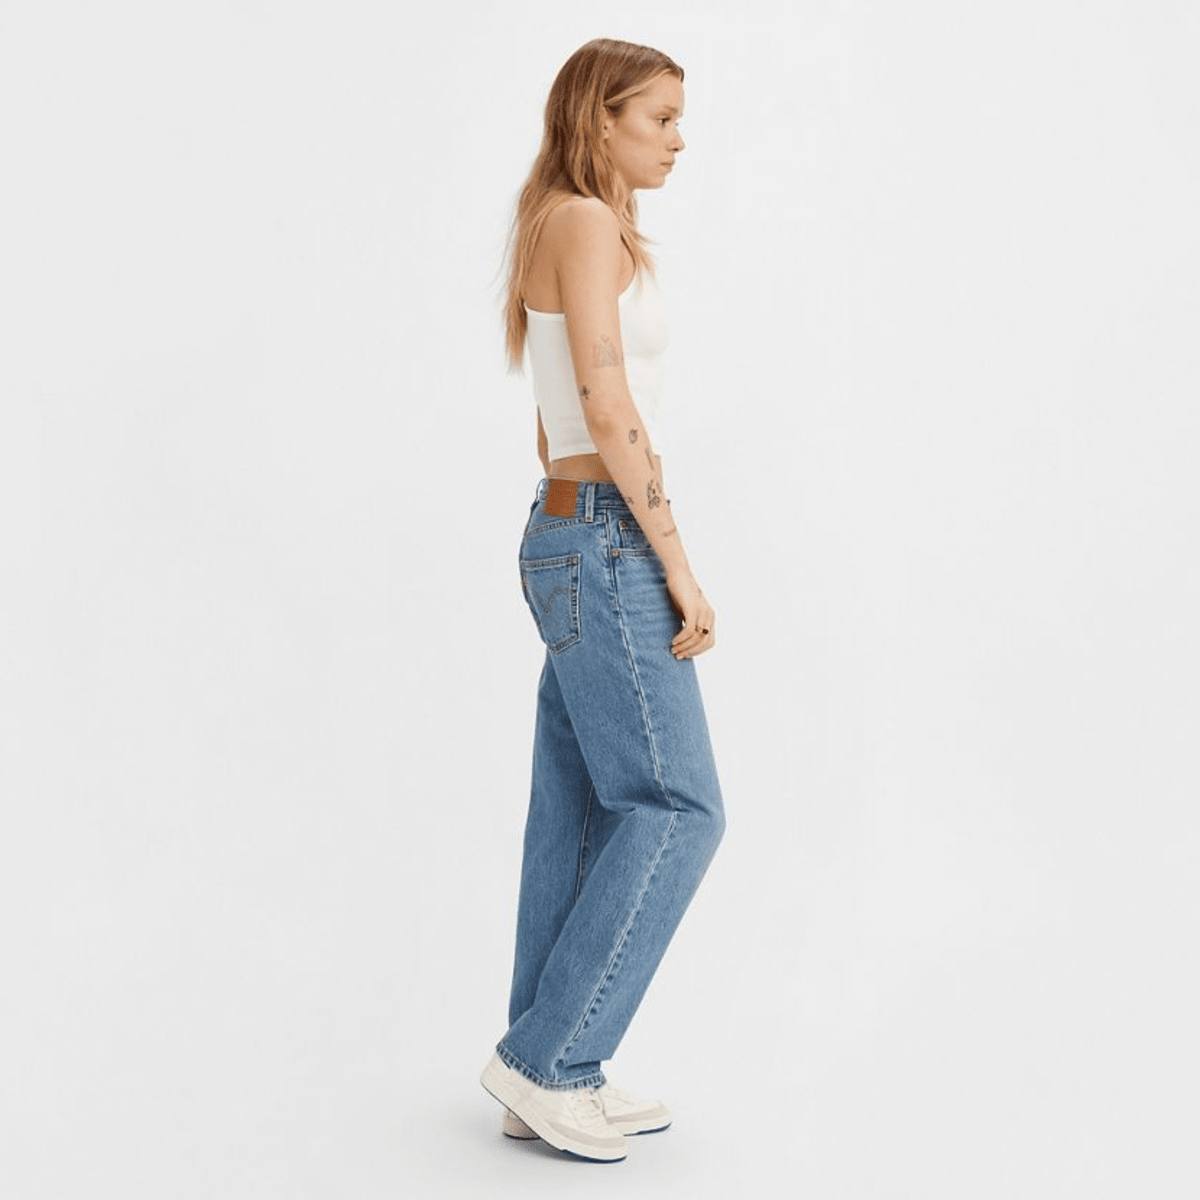 Levi's Just Really Nailed It With These '90s-Inspired Jeans - Fashionista